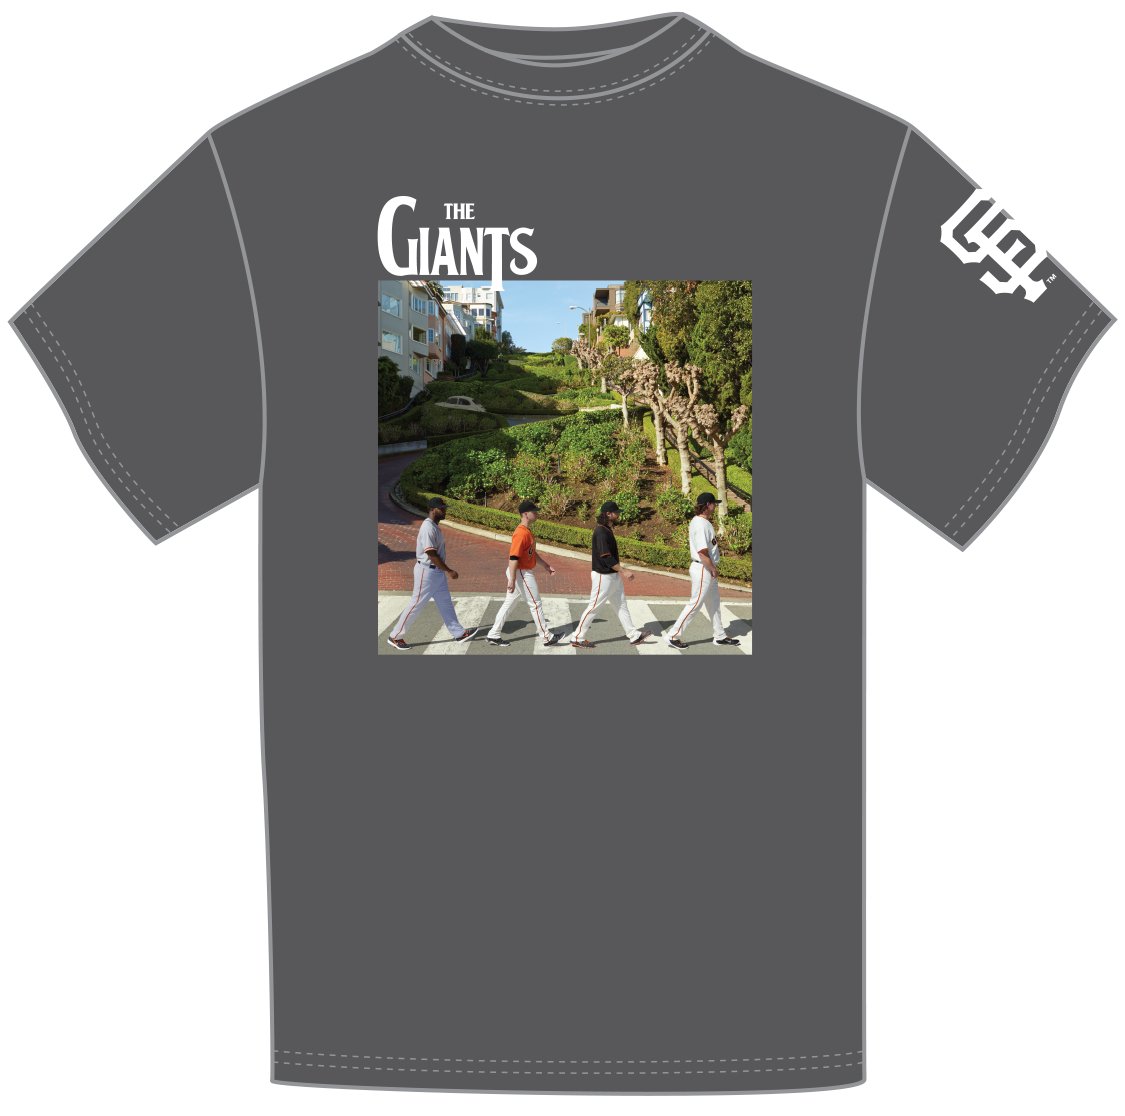 .@thebeatles Night at @ATTParkSF is 8/19! Get this Abbey Road-inspired shirt w/ your ...1125 x 1116